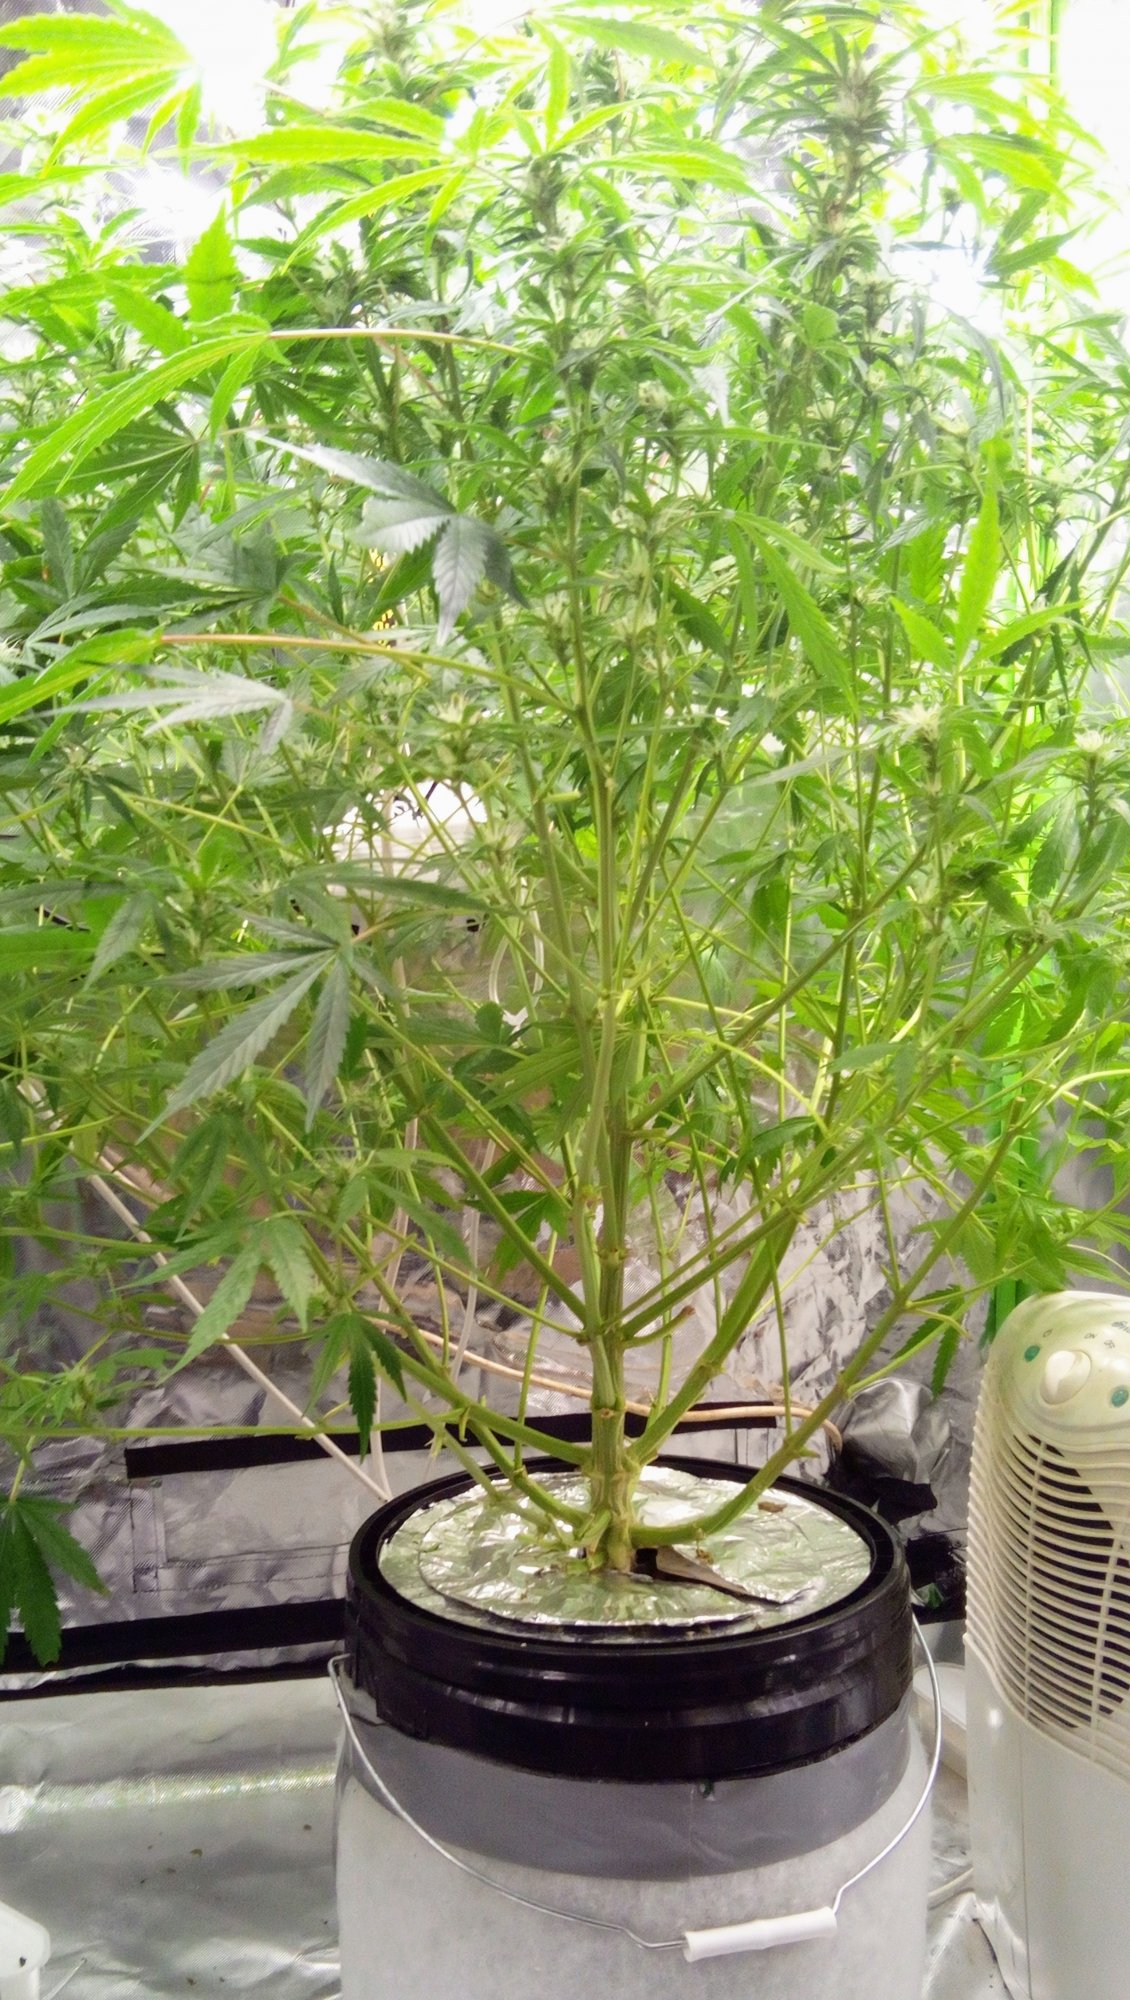 Home made rdwc system first grow adviceopinion on my girl 3